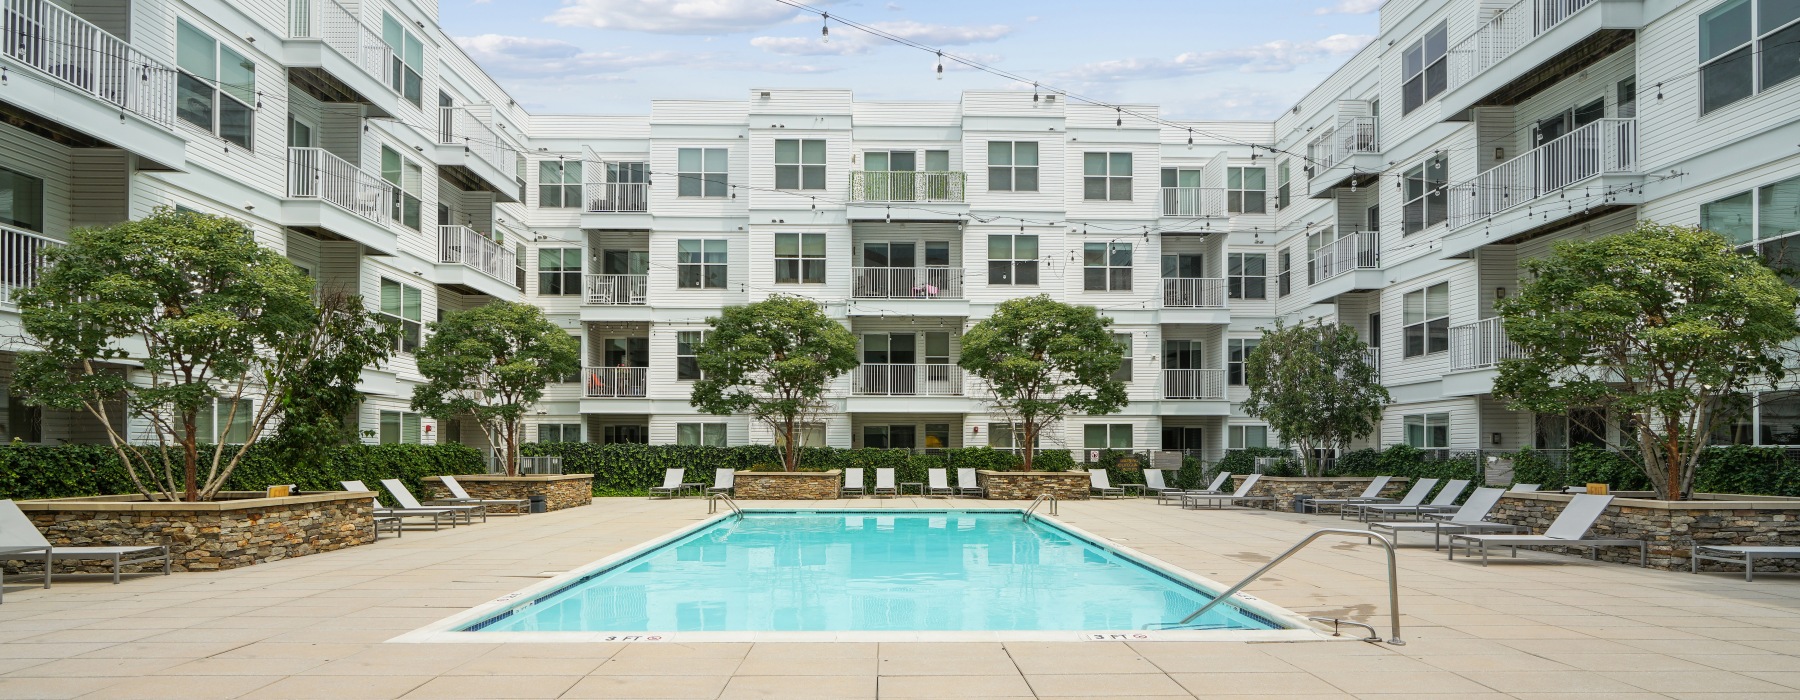 Swimming pool in a courtyard surrounded by lounge seating and an apartment building in the background